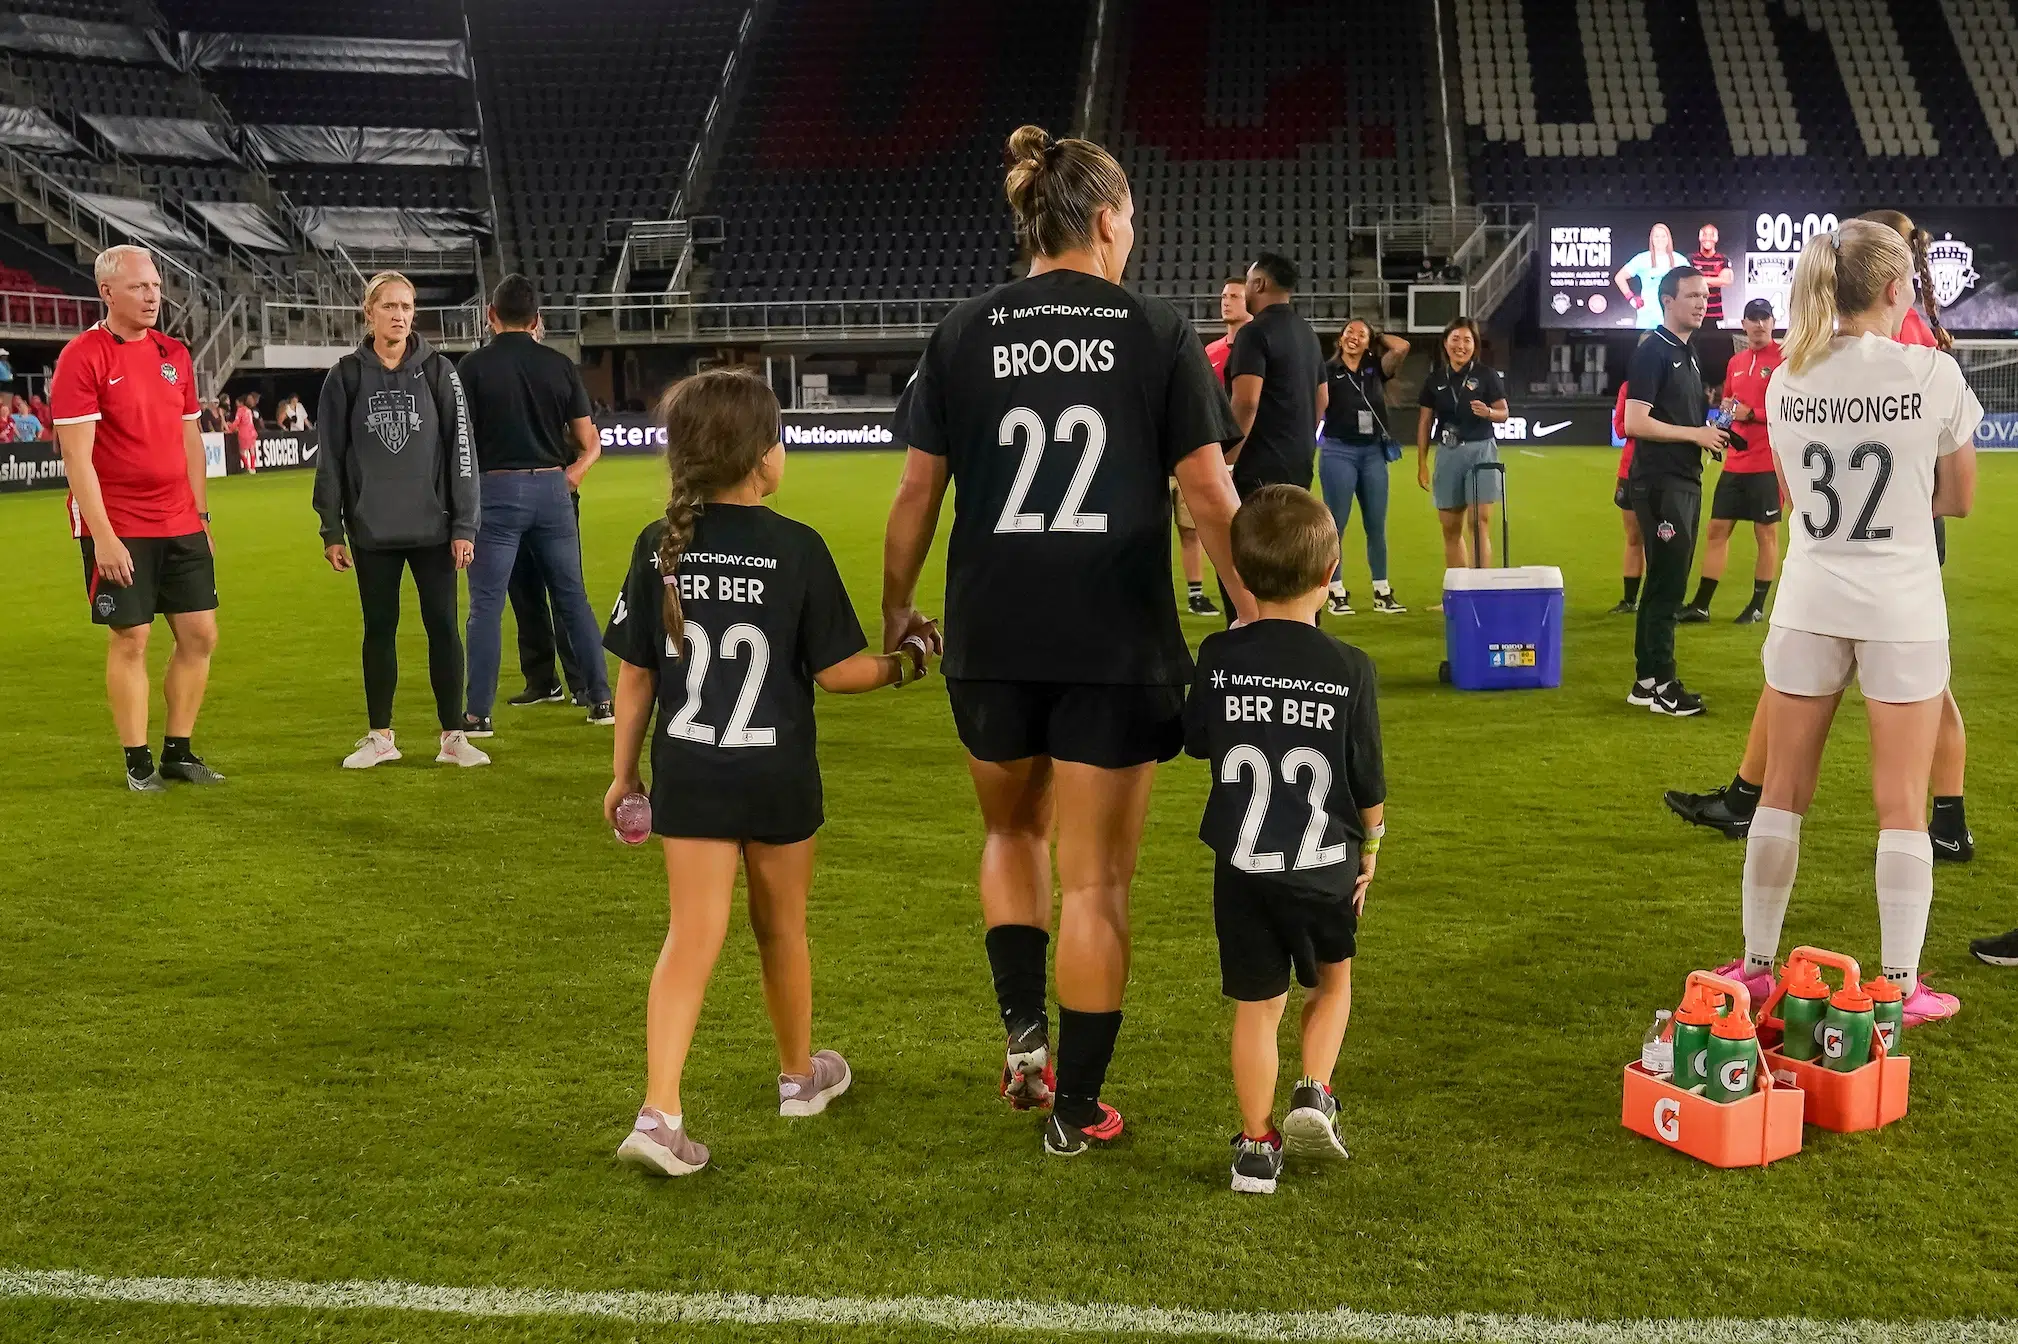 Dressed in all black uniforms, Amber Brooks walks away from the camera on the soccer pitch at Audi Field holding hands with a young girl and young boy. They're both wearing replicas of her black jersey.